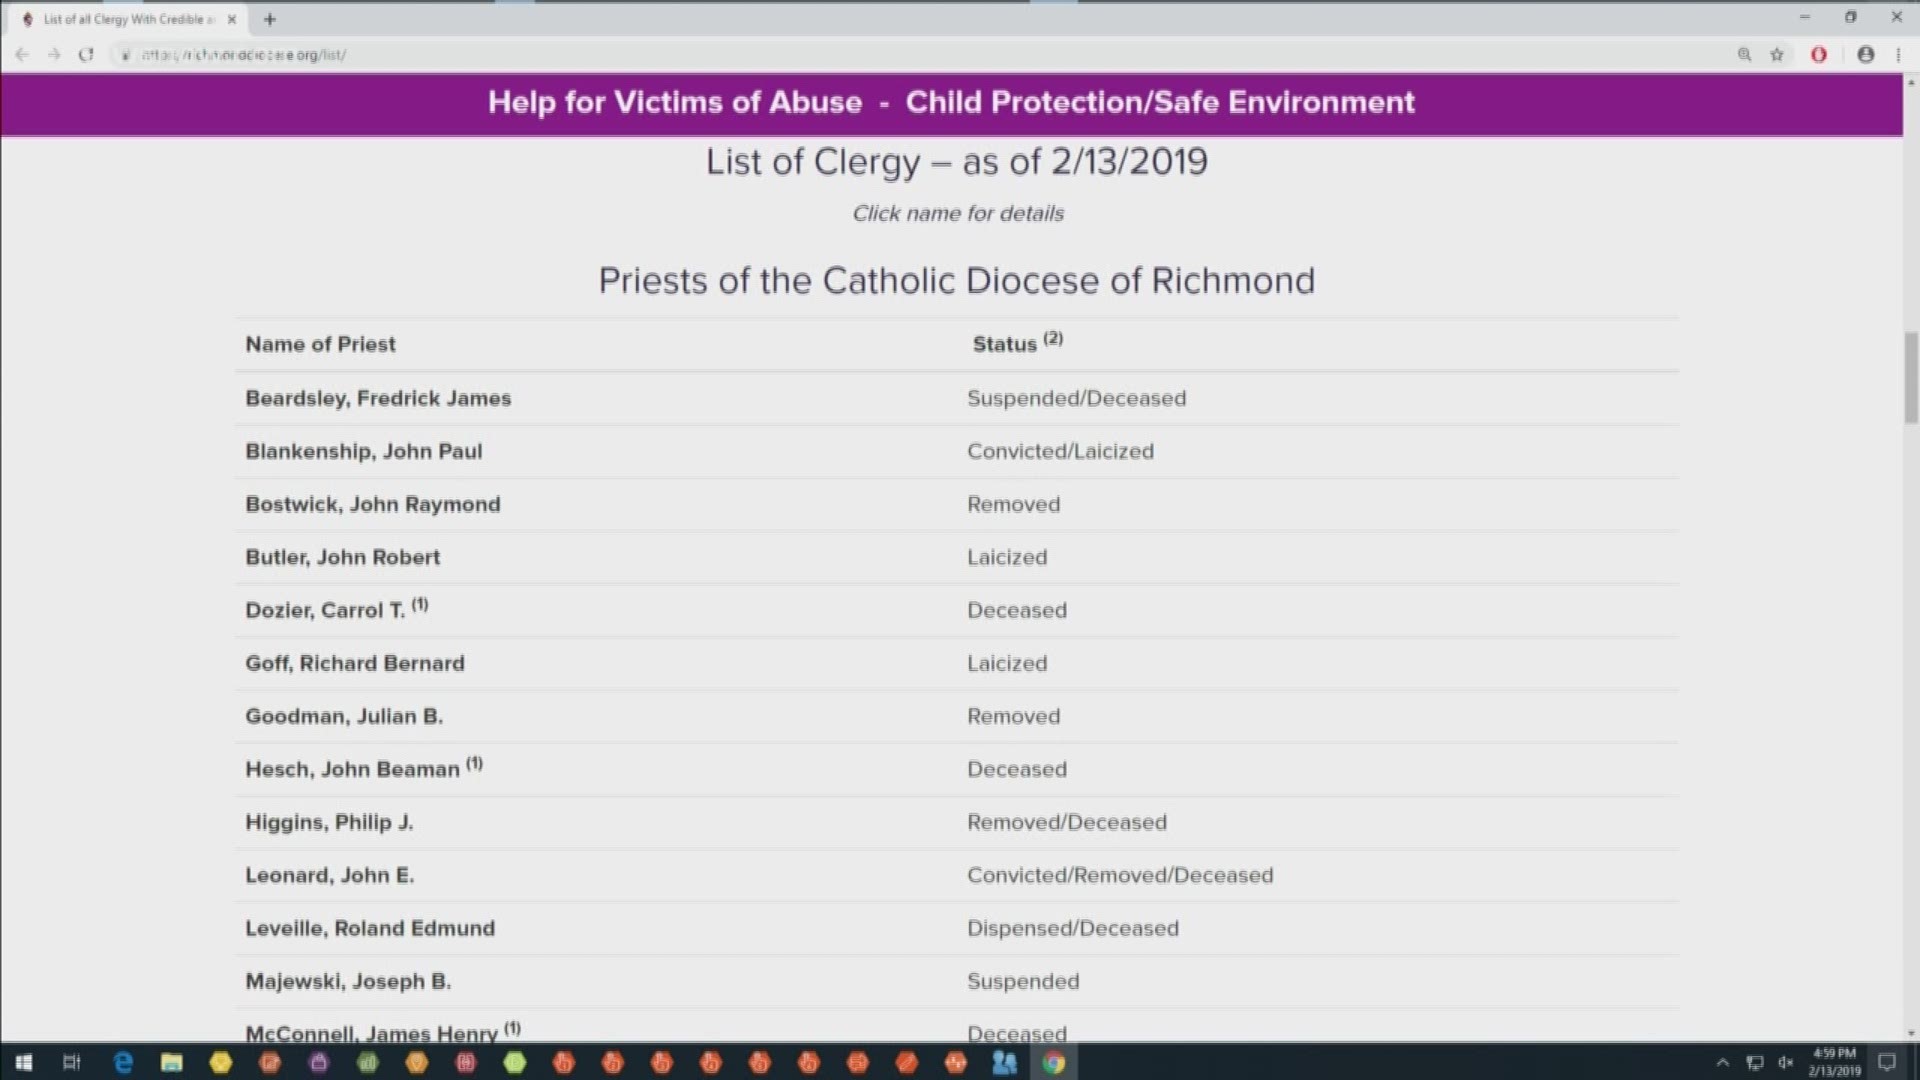 Of the 42 priests listed, 12 worked in Hampton Roads at some point. All of the priests listed have credible, substantiated sexual assault claims against them.